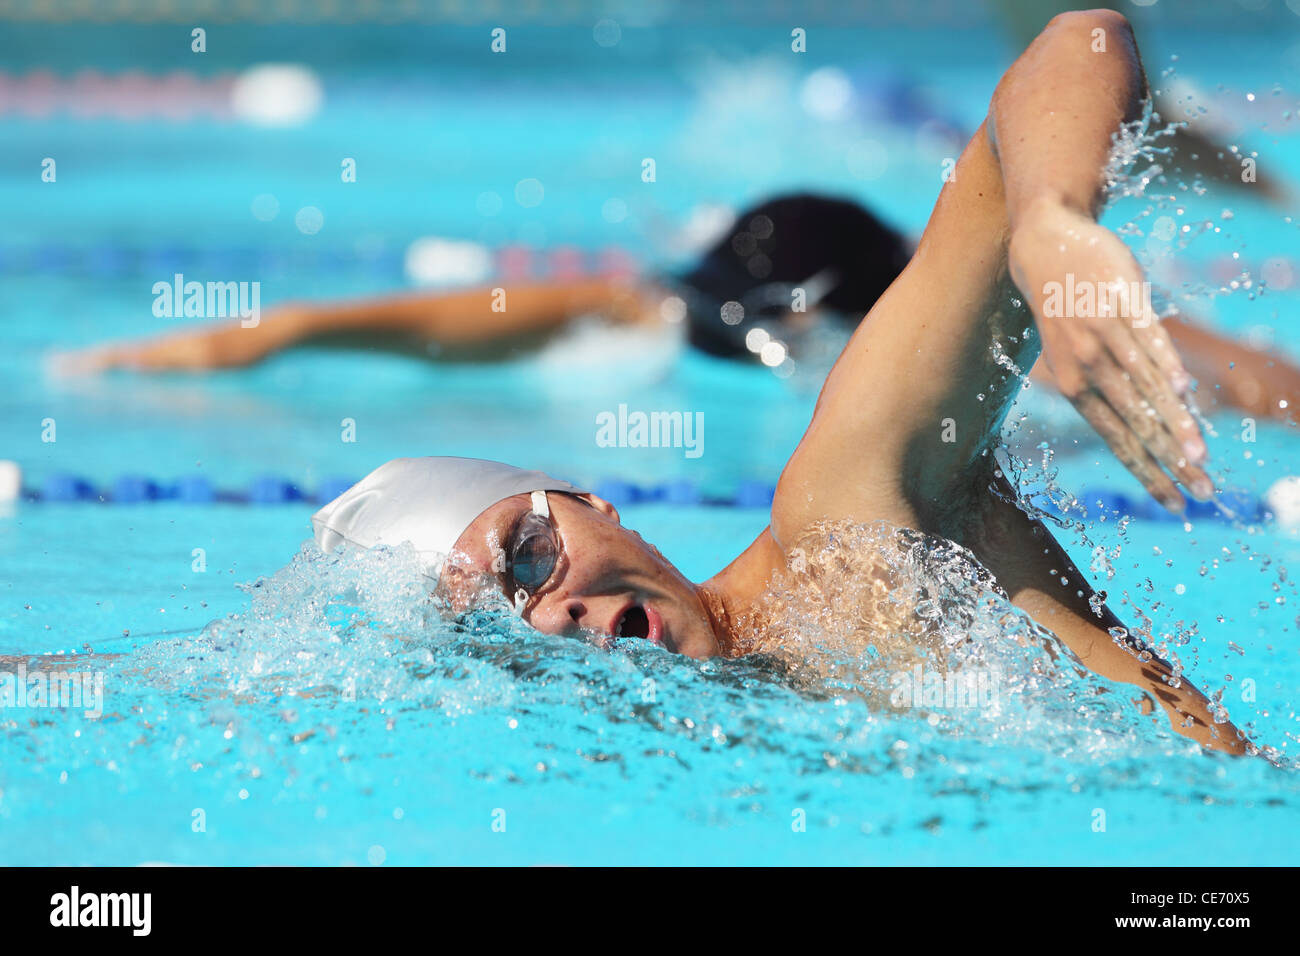 Swimmers Competing in Pool Stock Photo